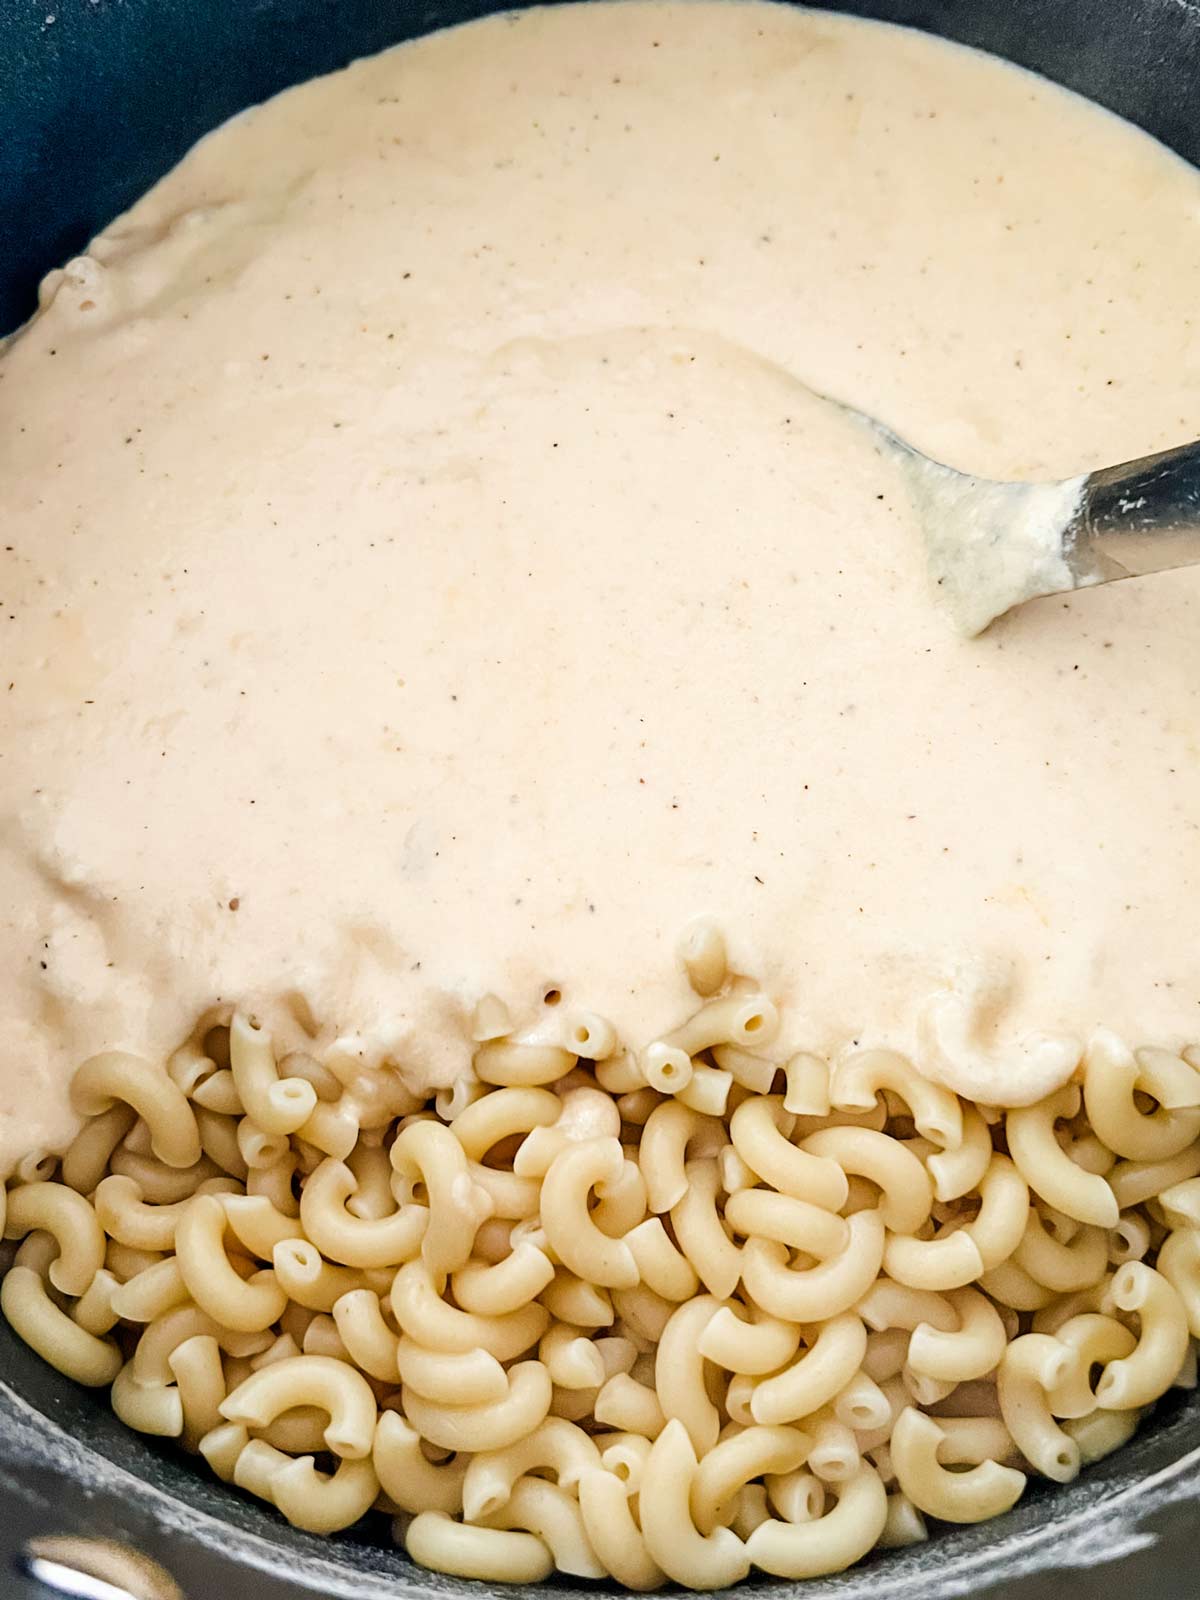 Elbow noodles being added to a cheese sauce.